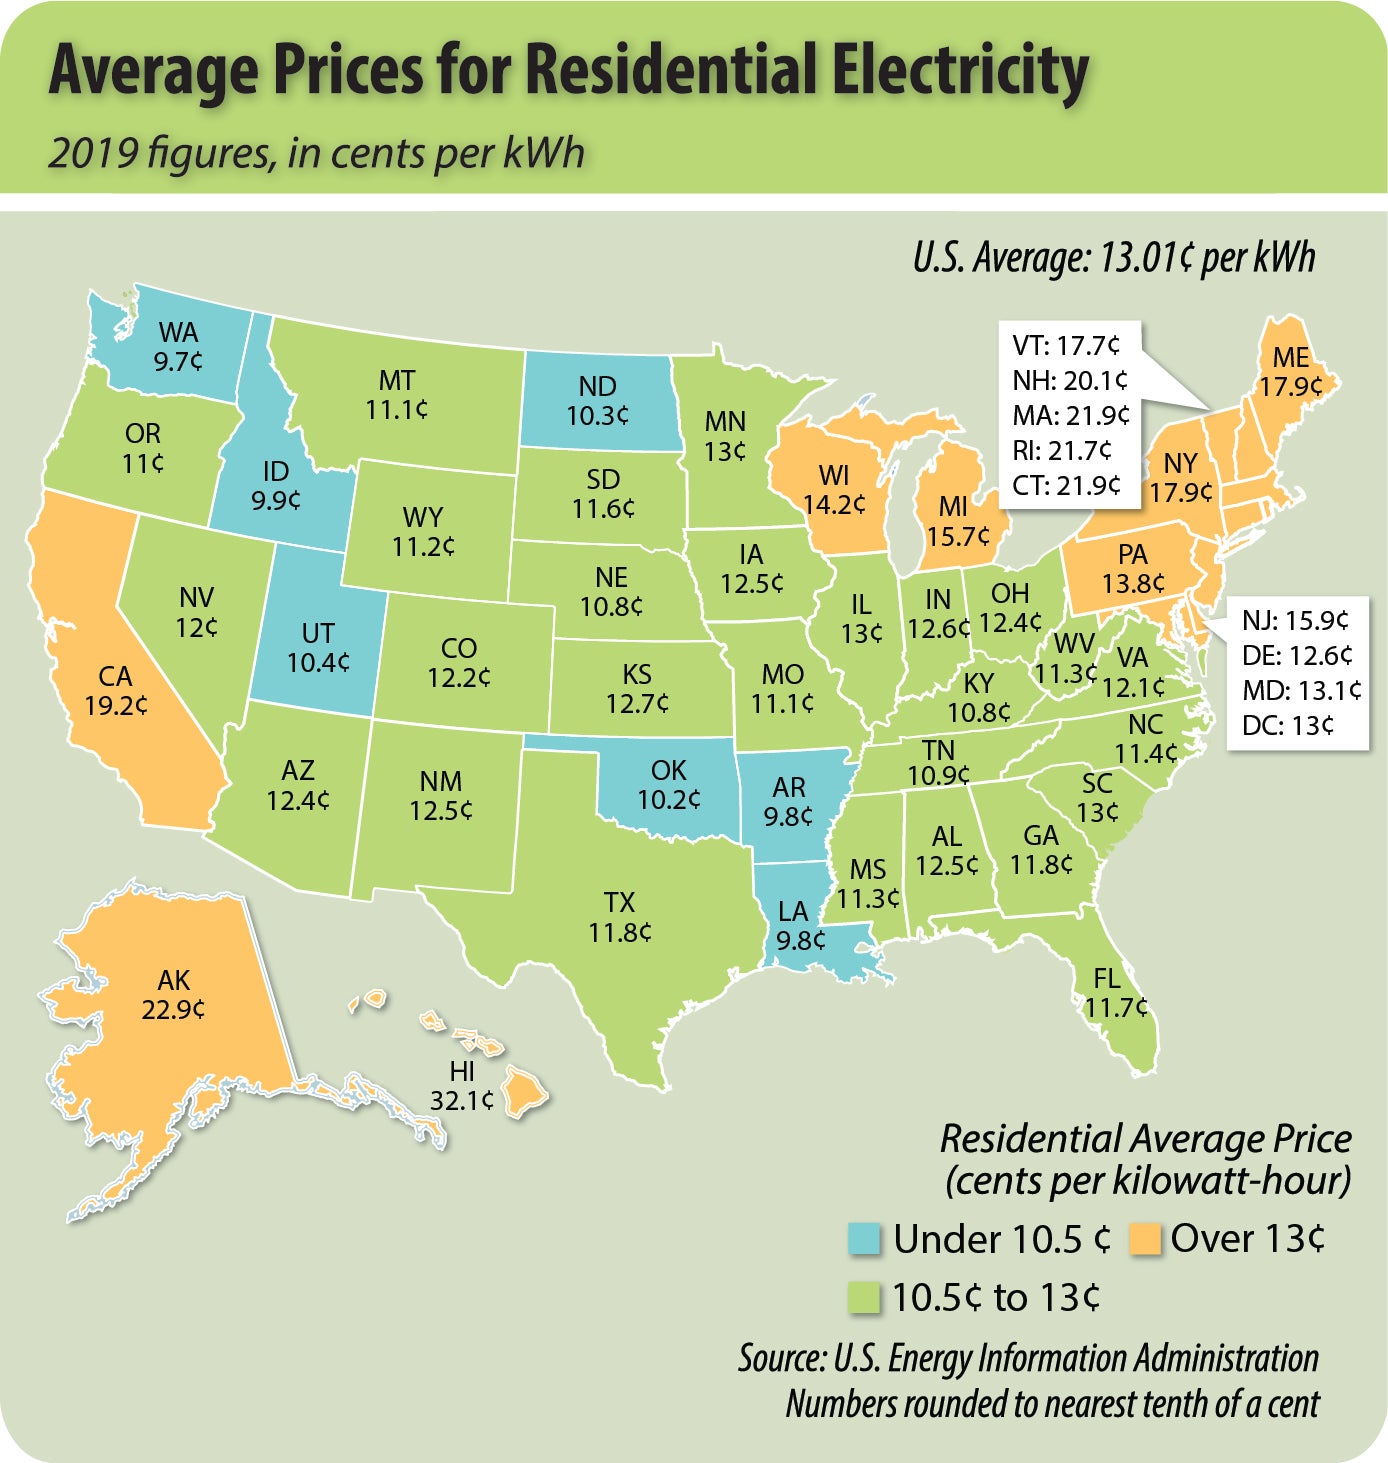 Average Prices for Residential Electricity